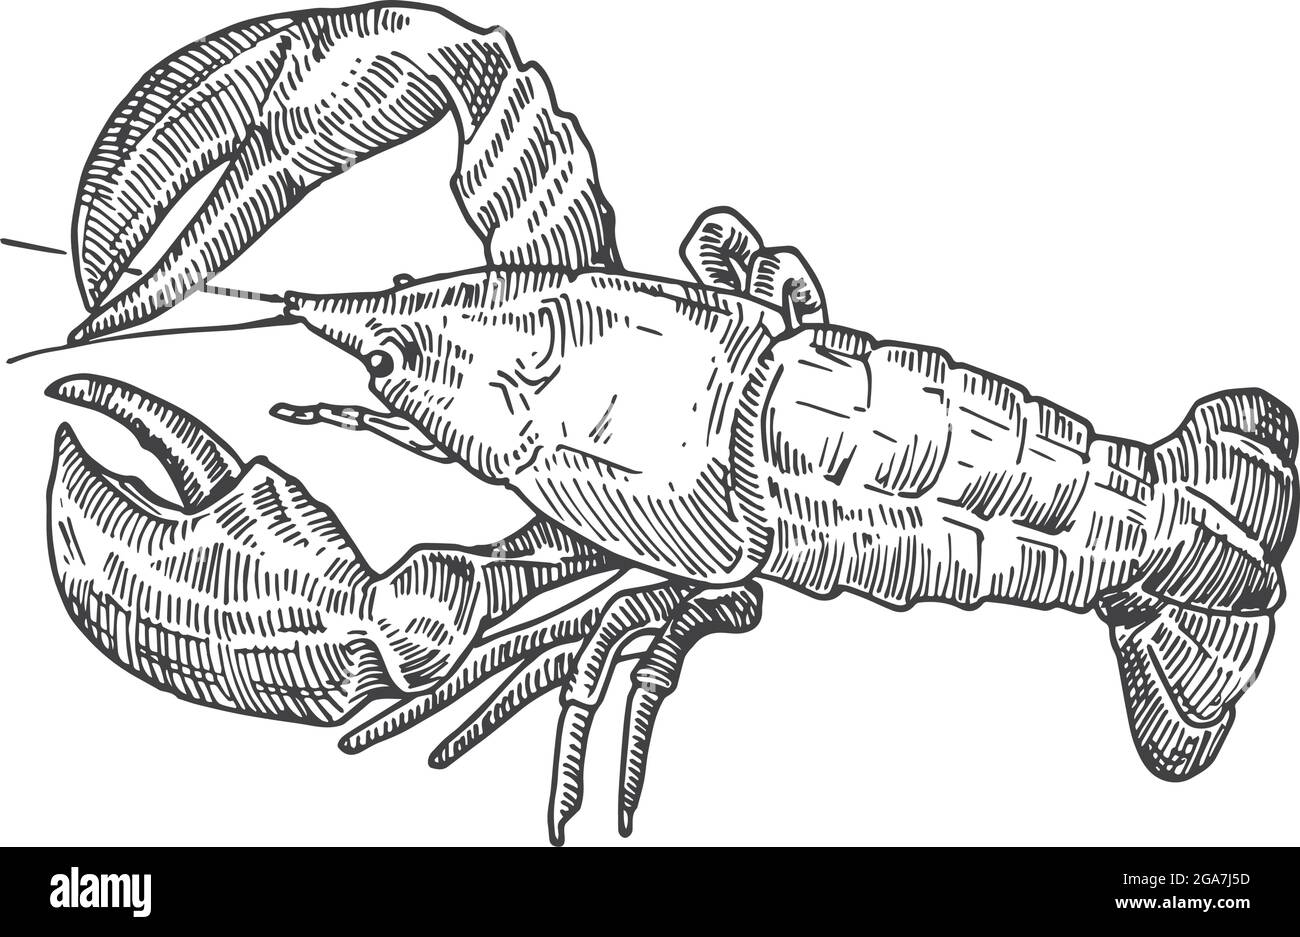 How to draw a lobster  Step by step Drawing tutorials